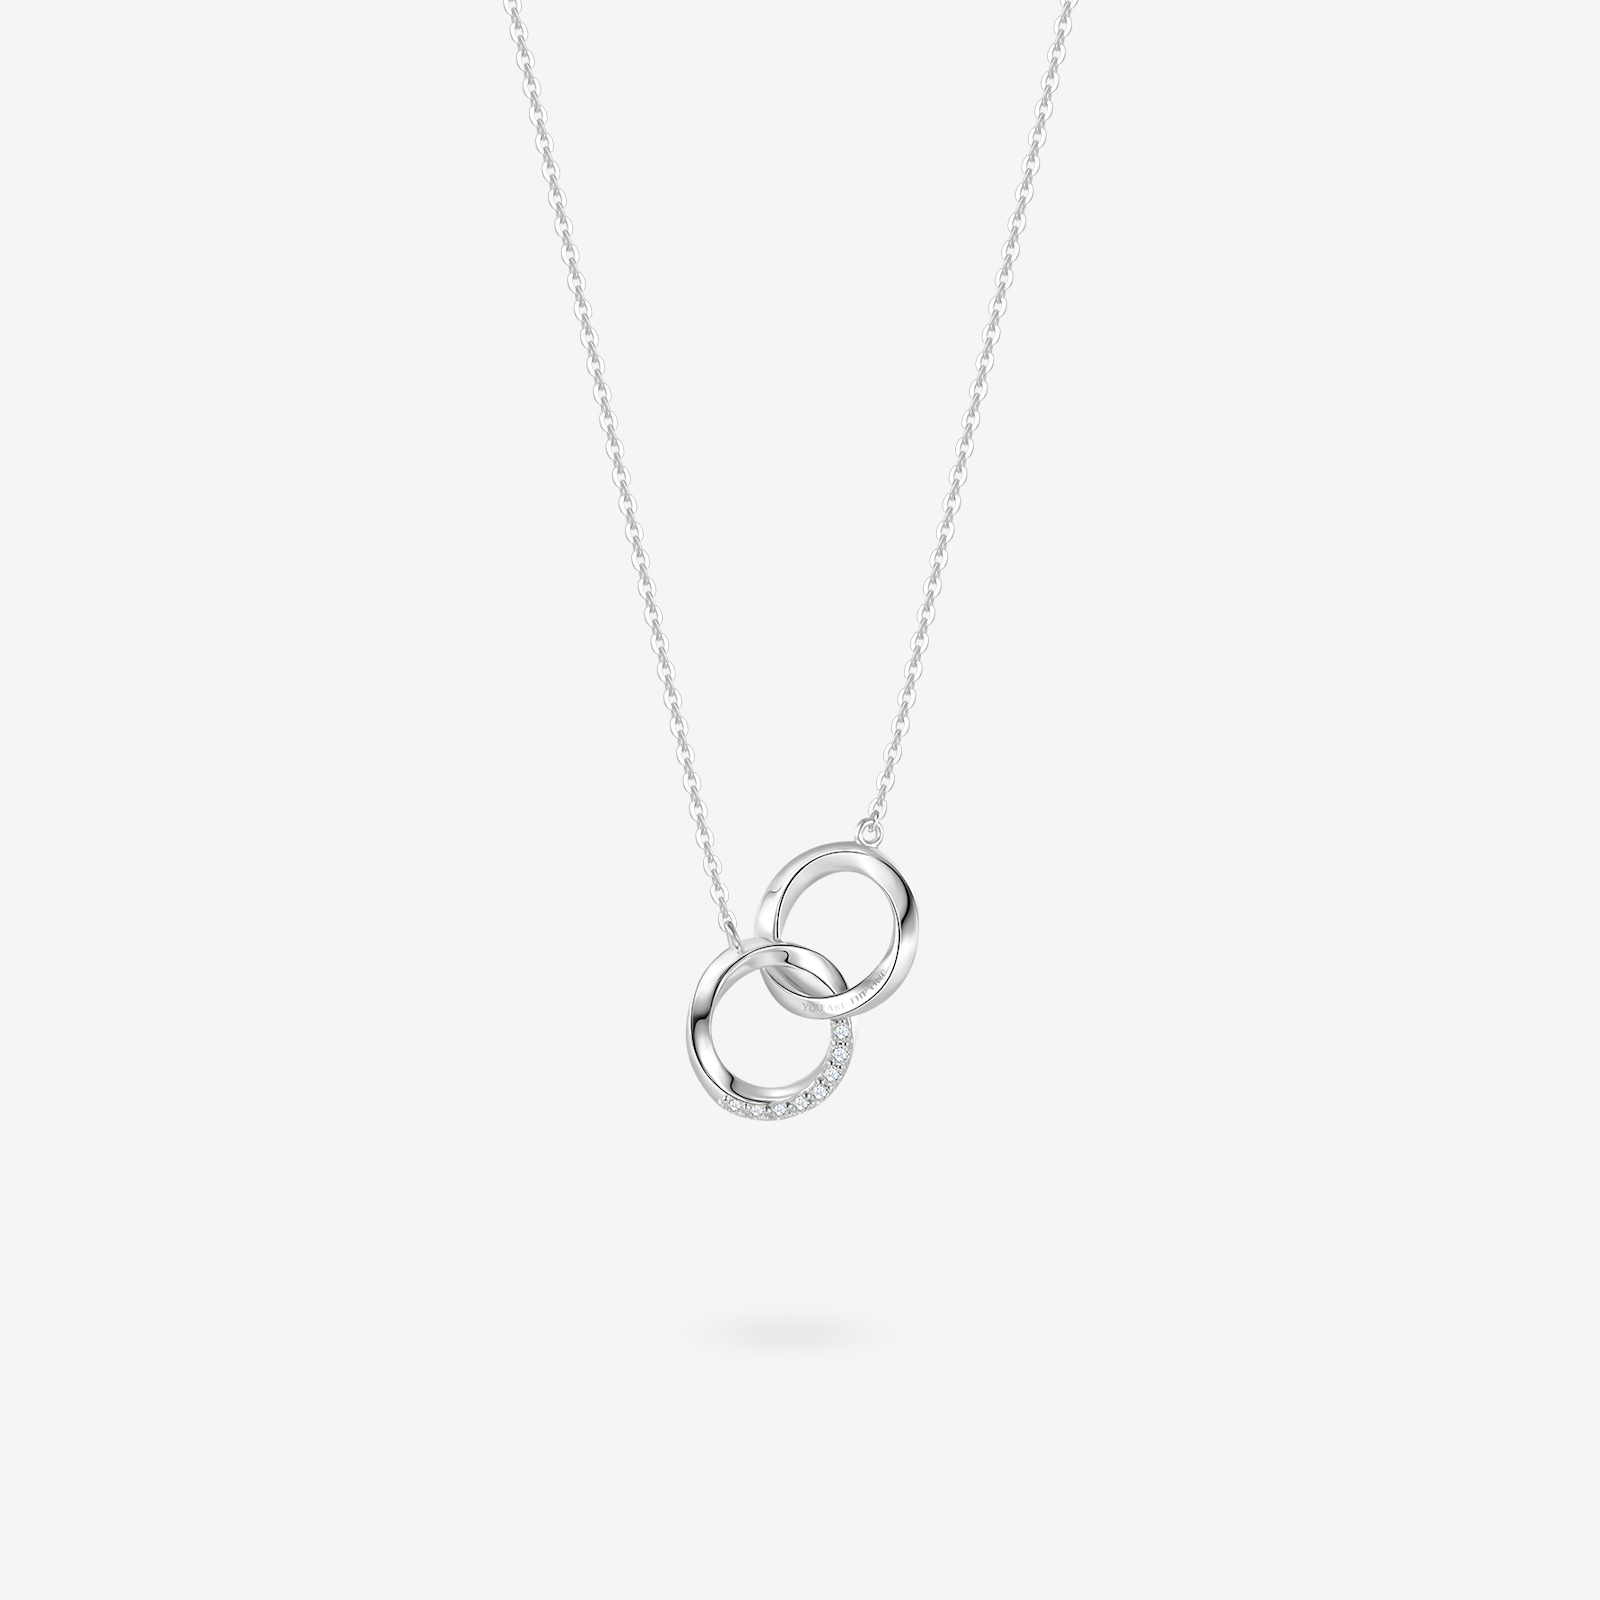 "Connected" Mobius Matching Ring Sterling Silver Necklace